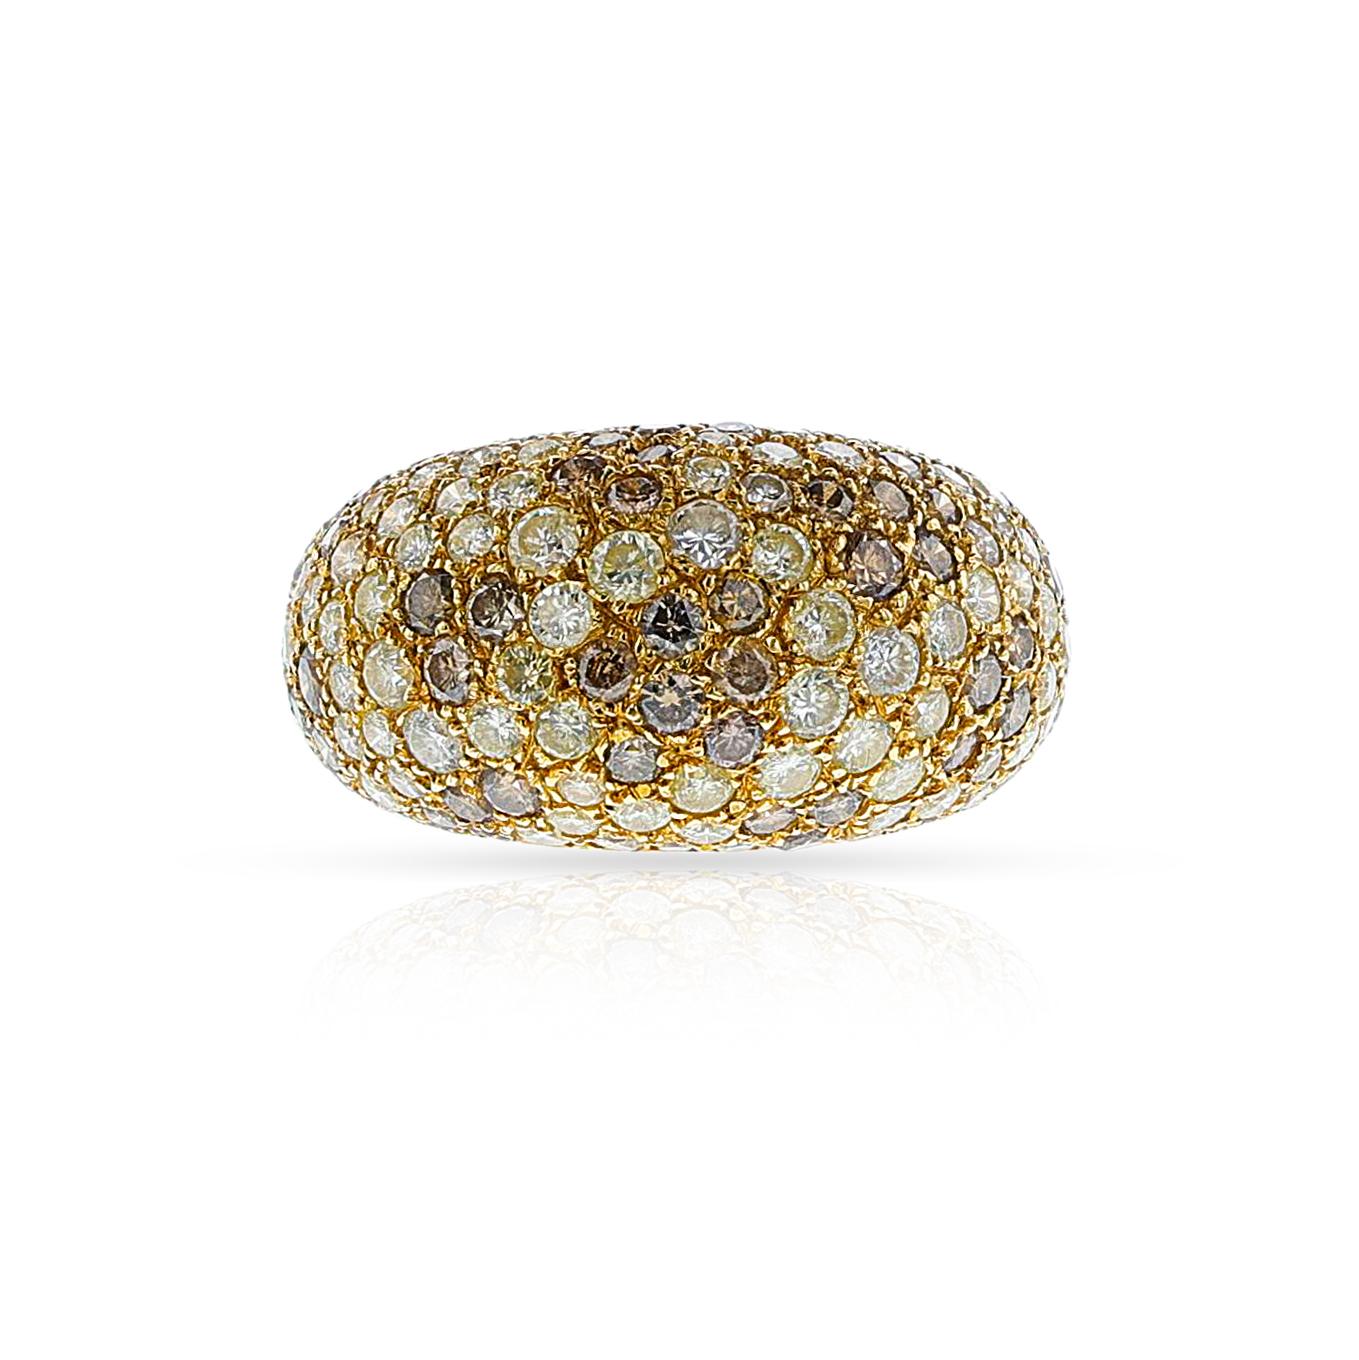 Women's or Men's Cartier France Diamond and Colored Diamond Bombe Ring, 18k For Sale